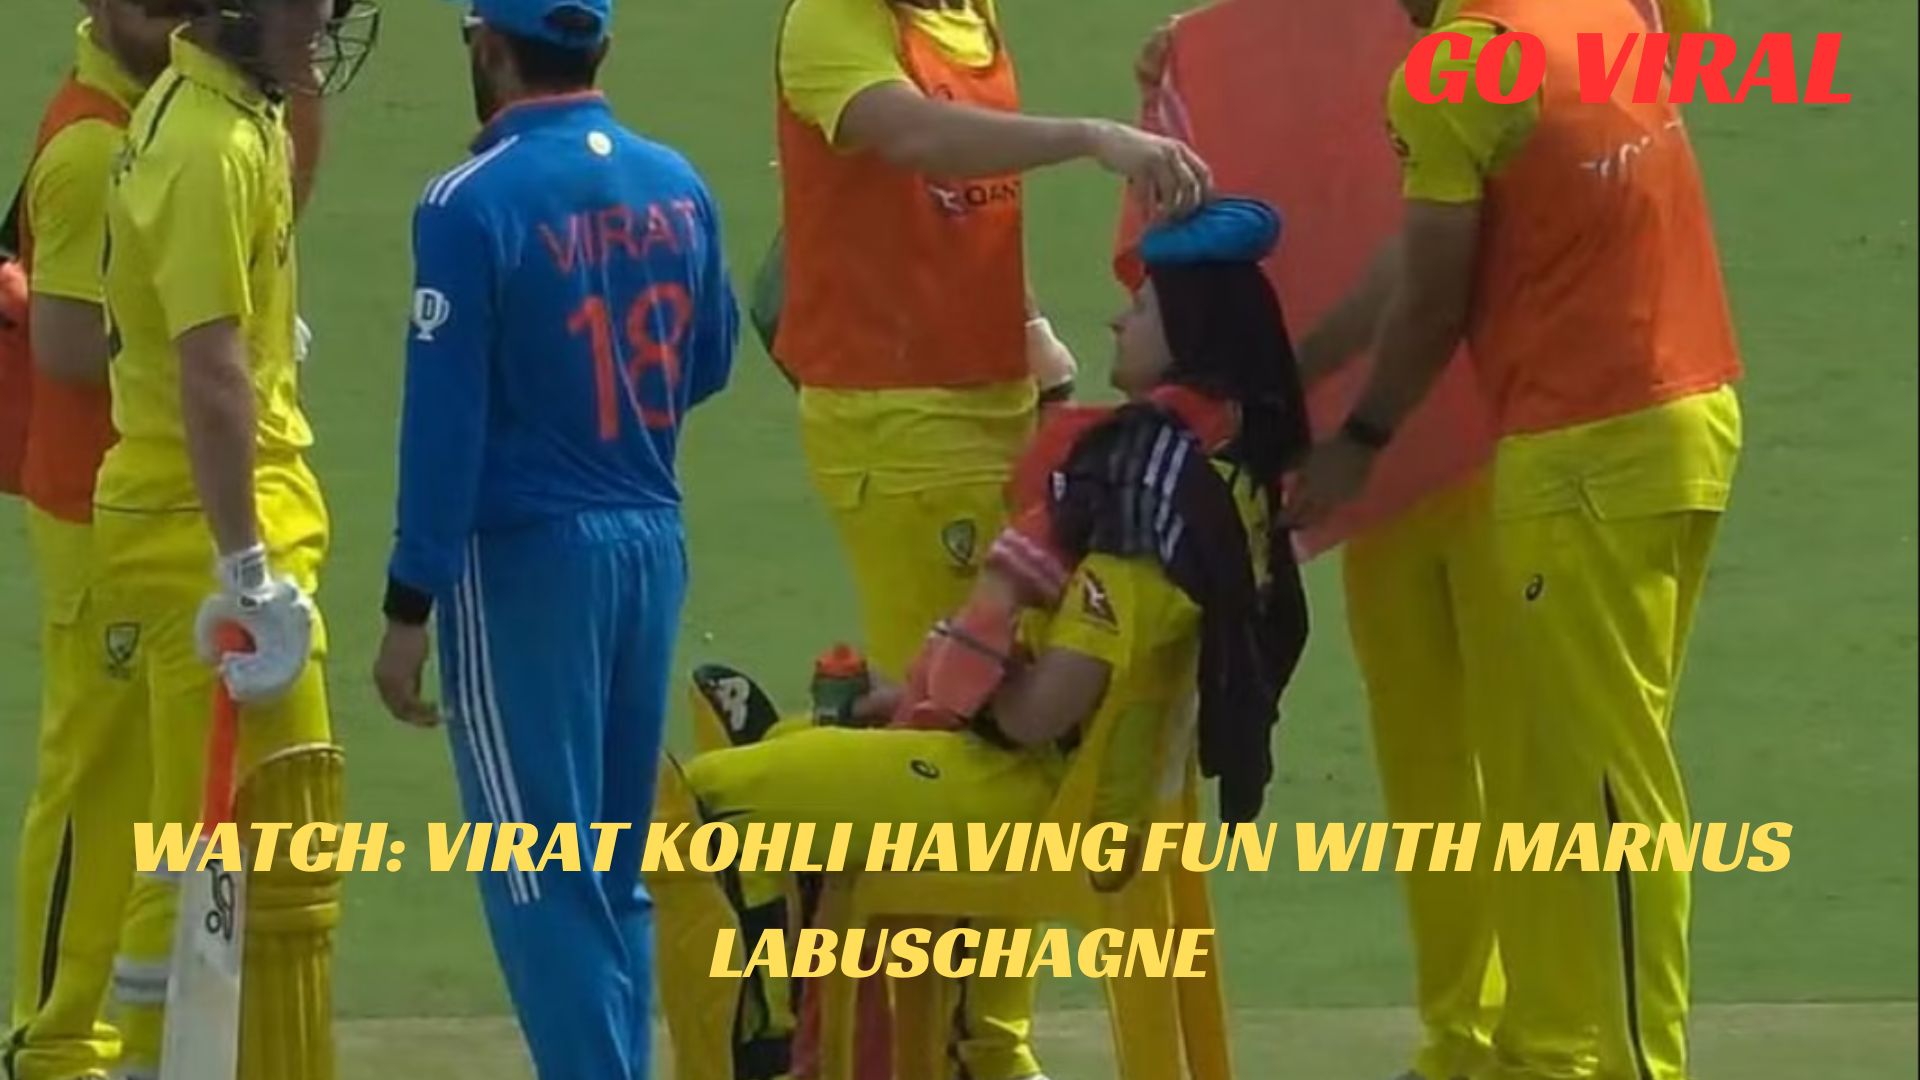 Watch: Kohli and Labuschagne let loose and enjoy themselves.